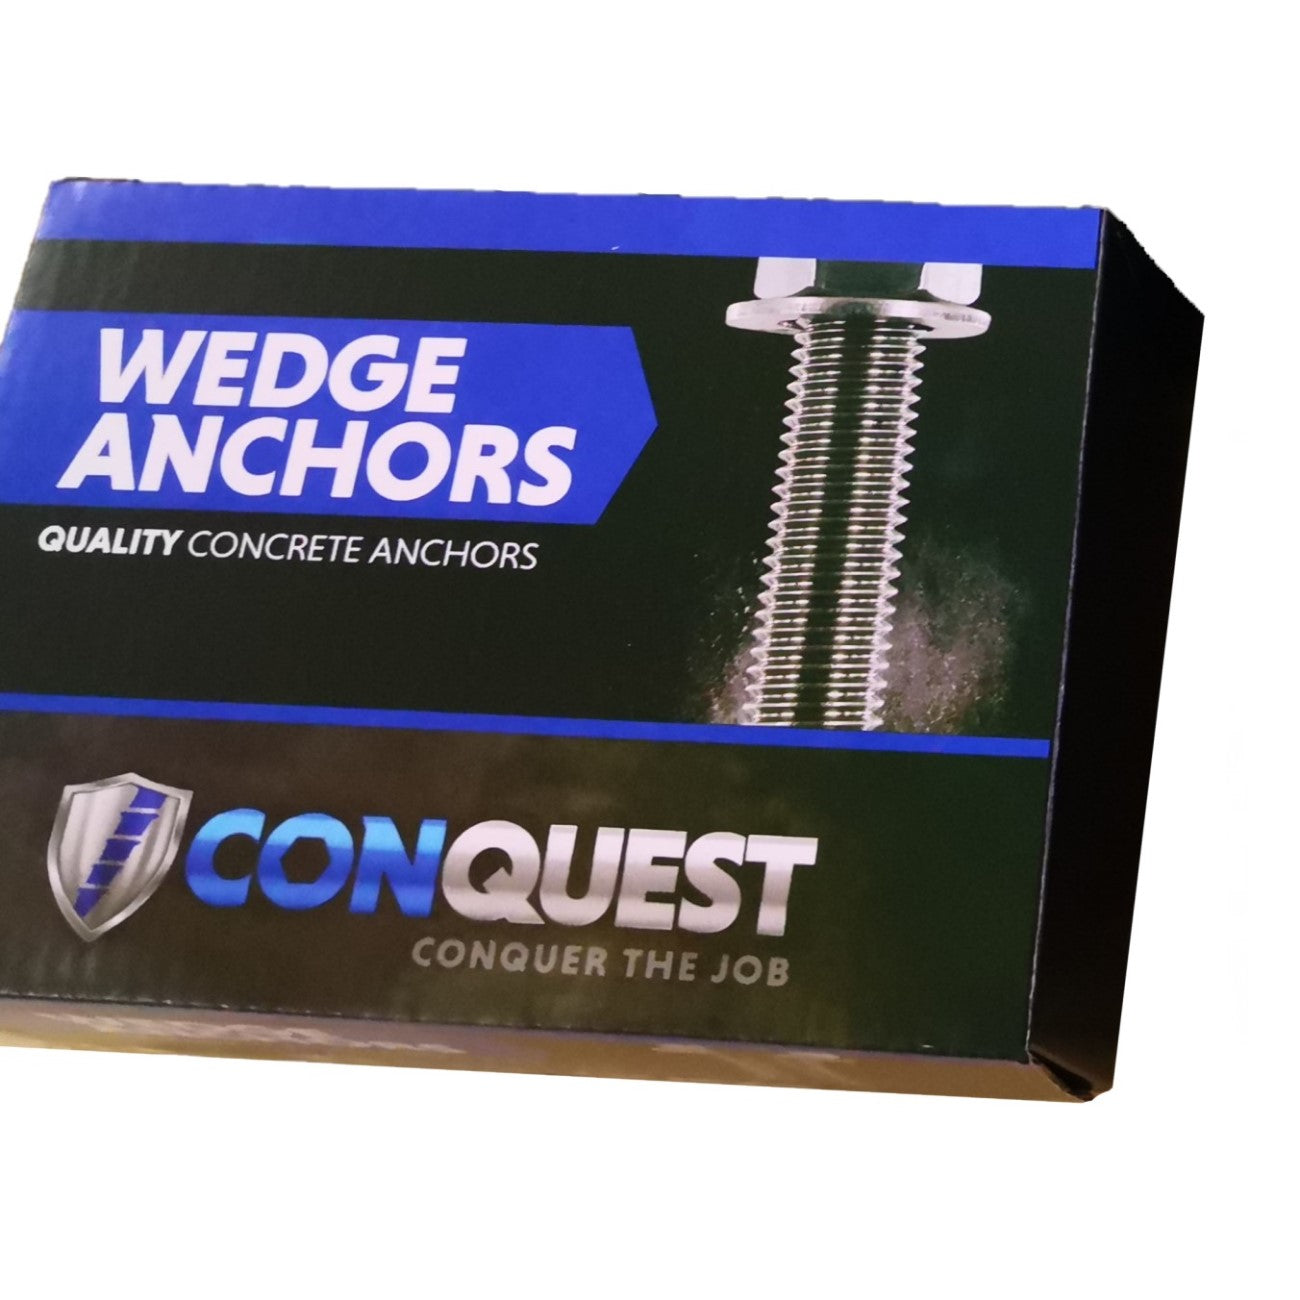 1/2" x 5-1/2" Conquest Wedge Anchors - 304 Stainless Steel, Pkg 25